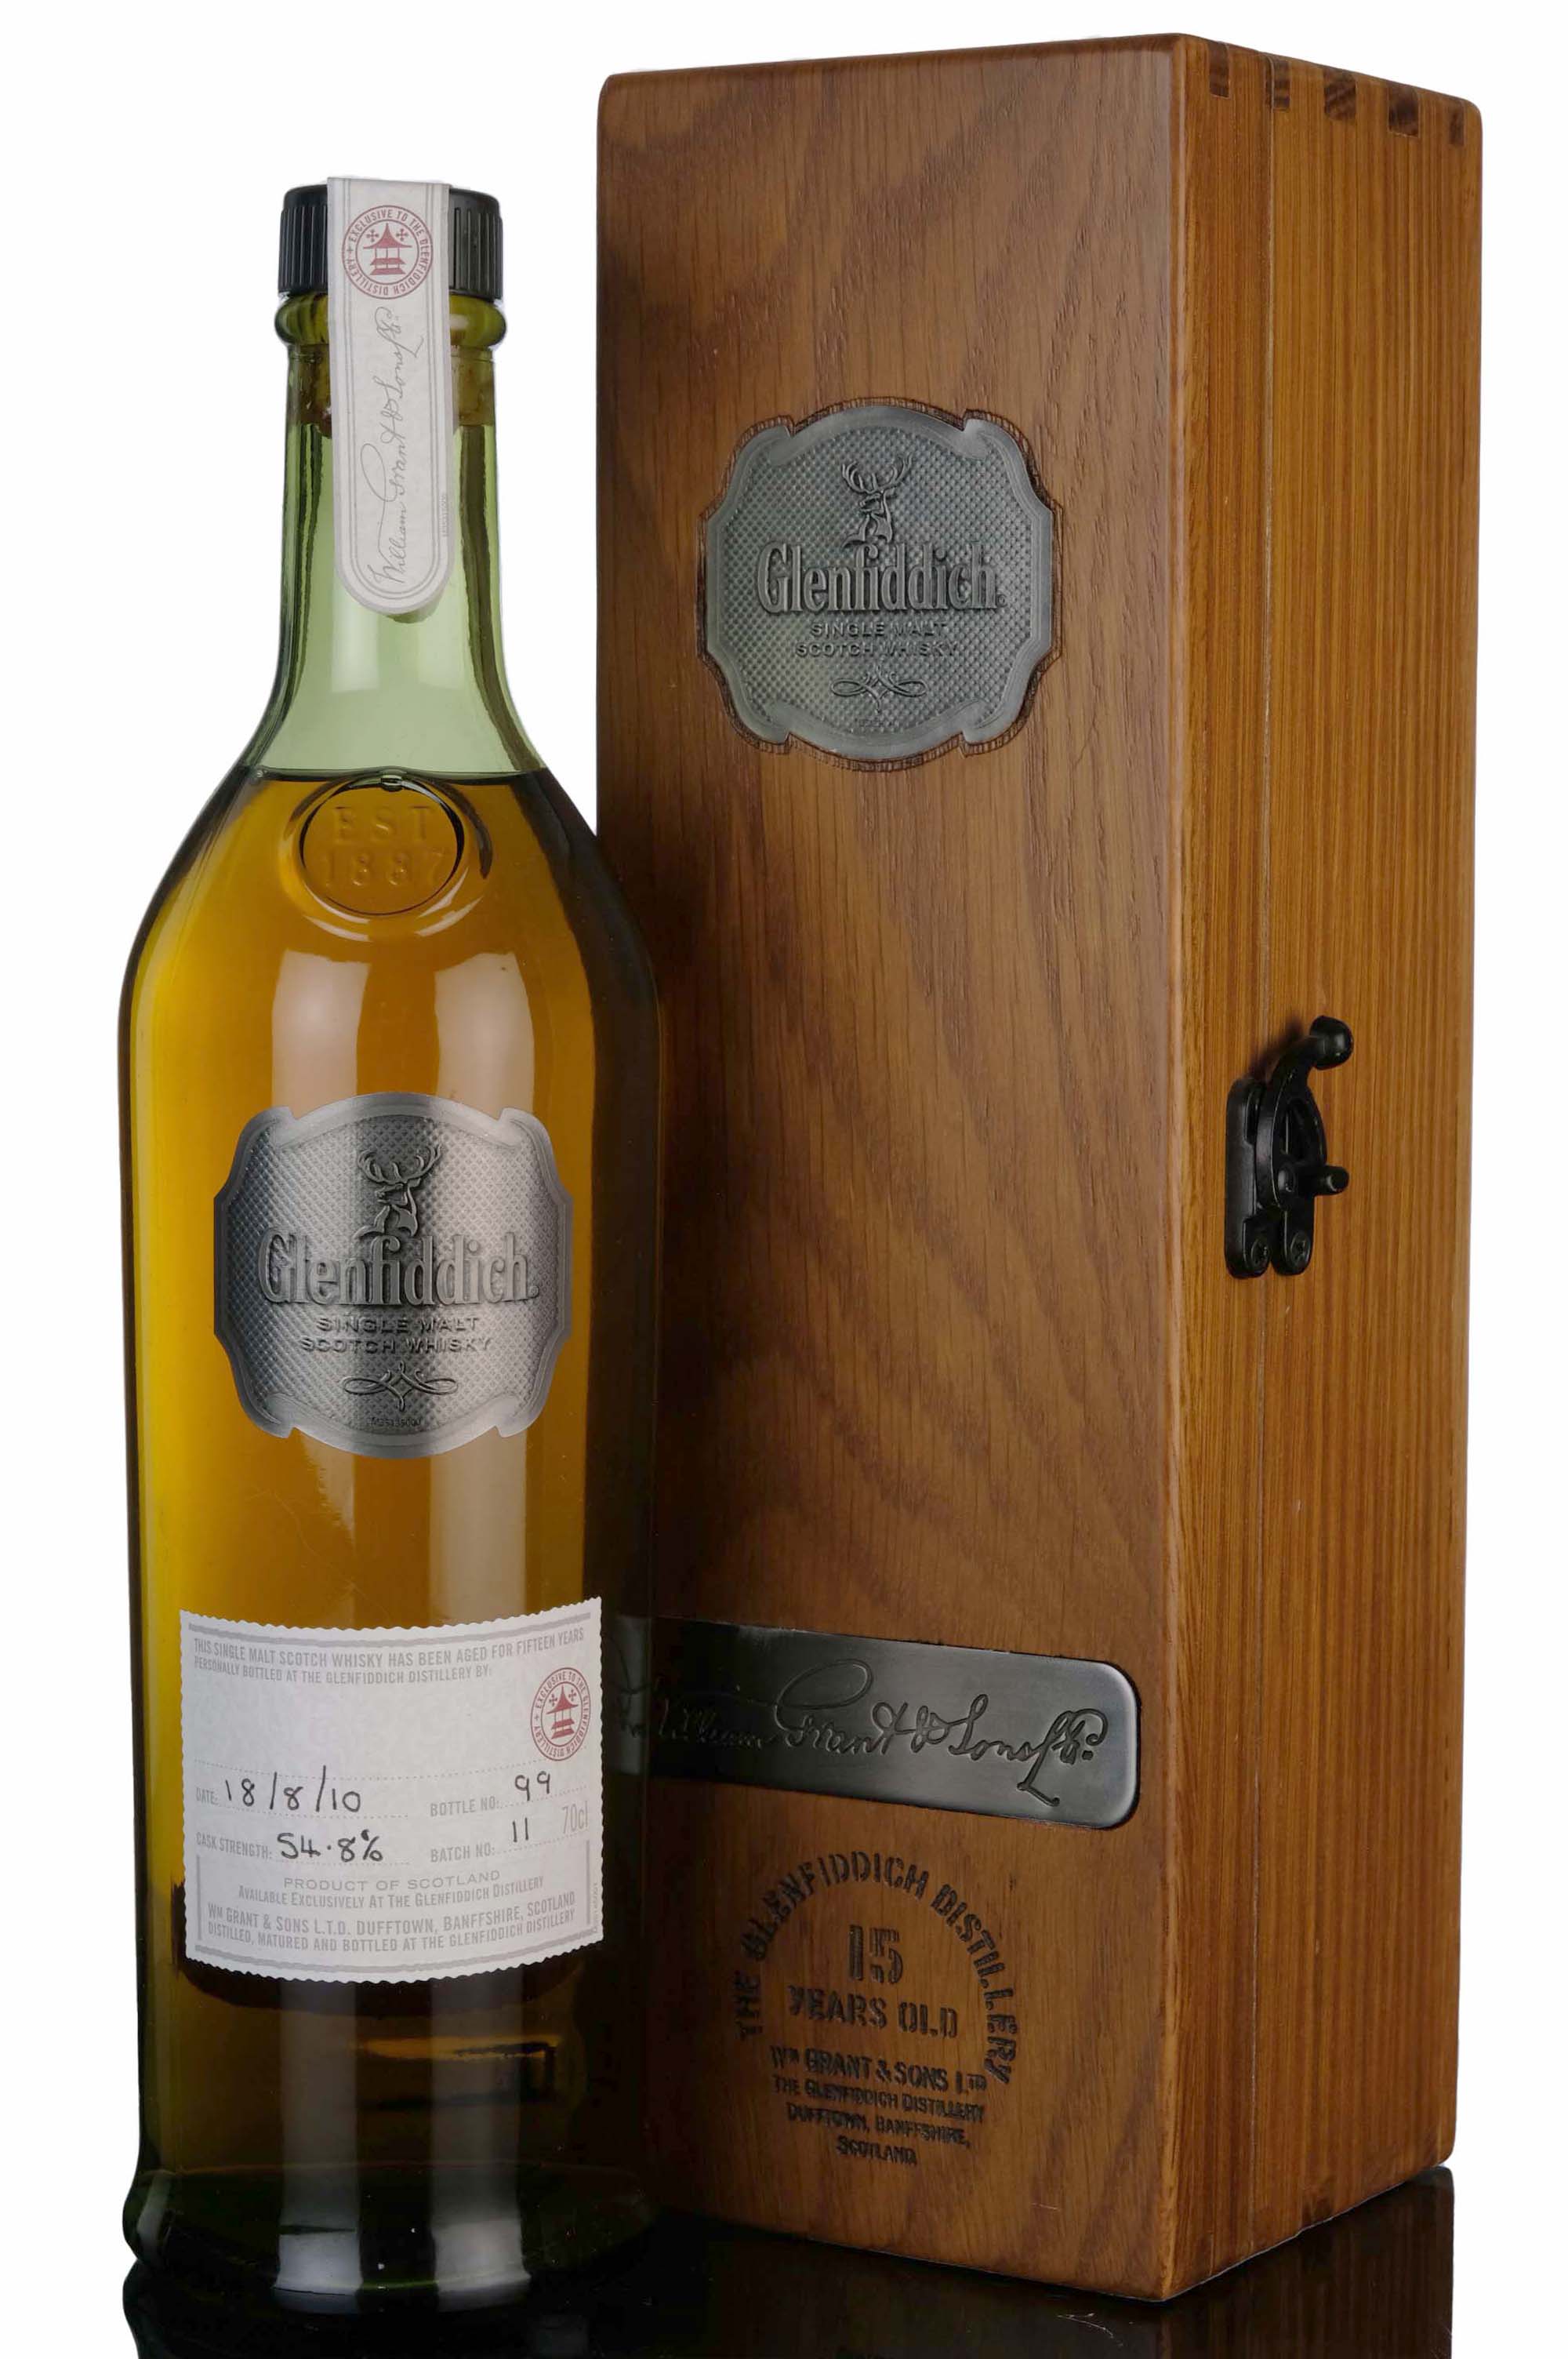 Glenfiddich 15 Year Old - Batch 11 - 2010 Release - Distillery Exclusive Hand Filled